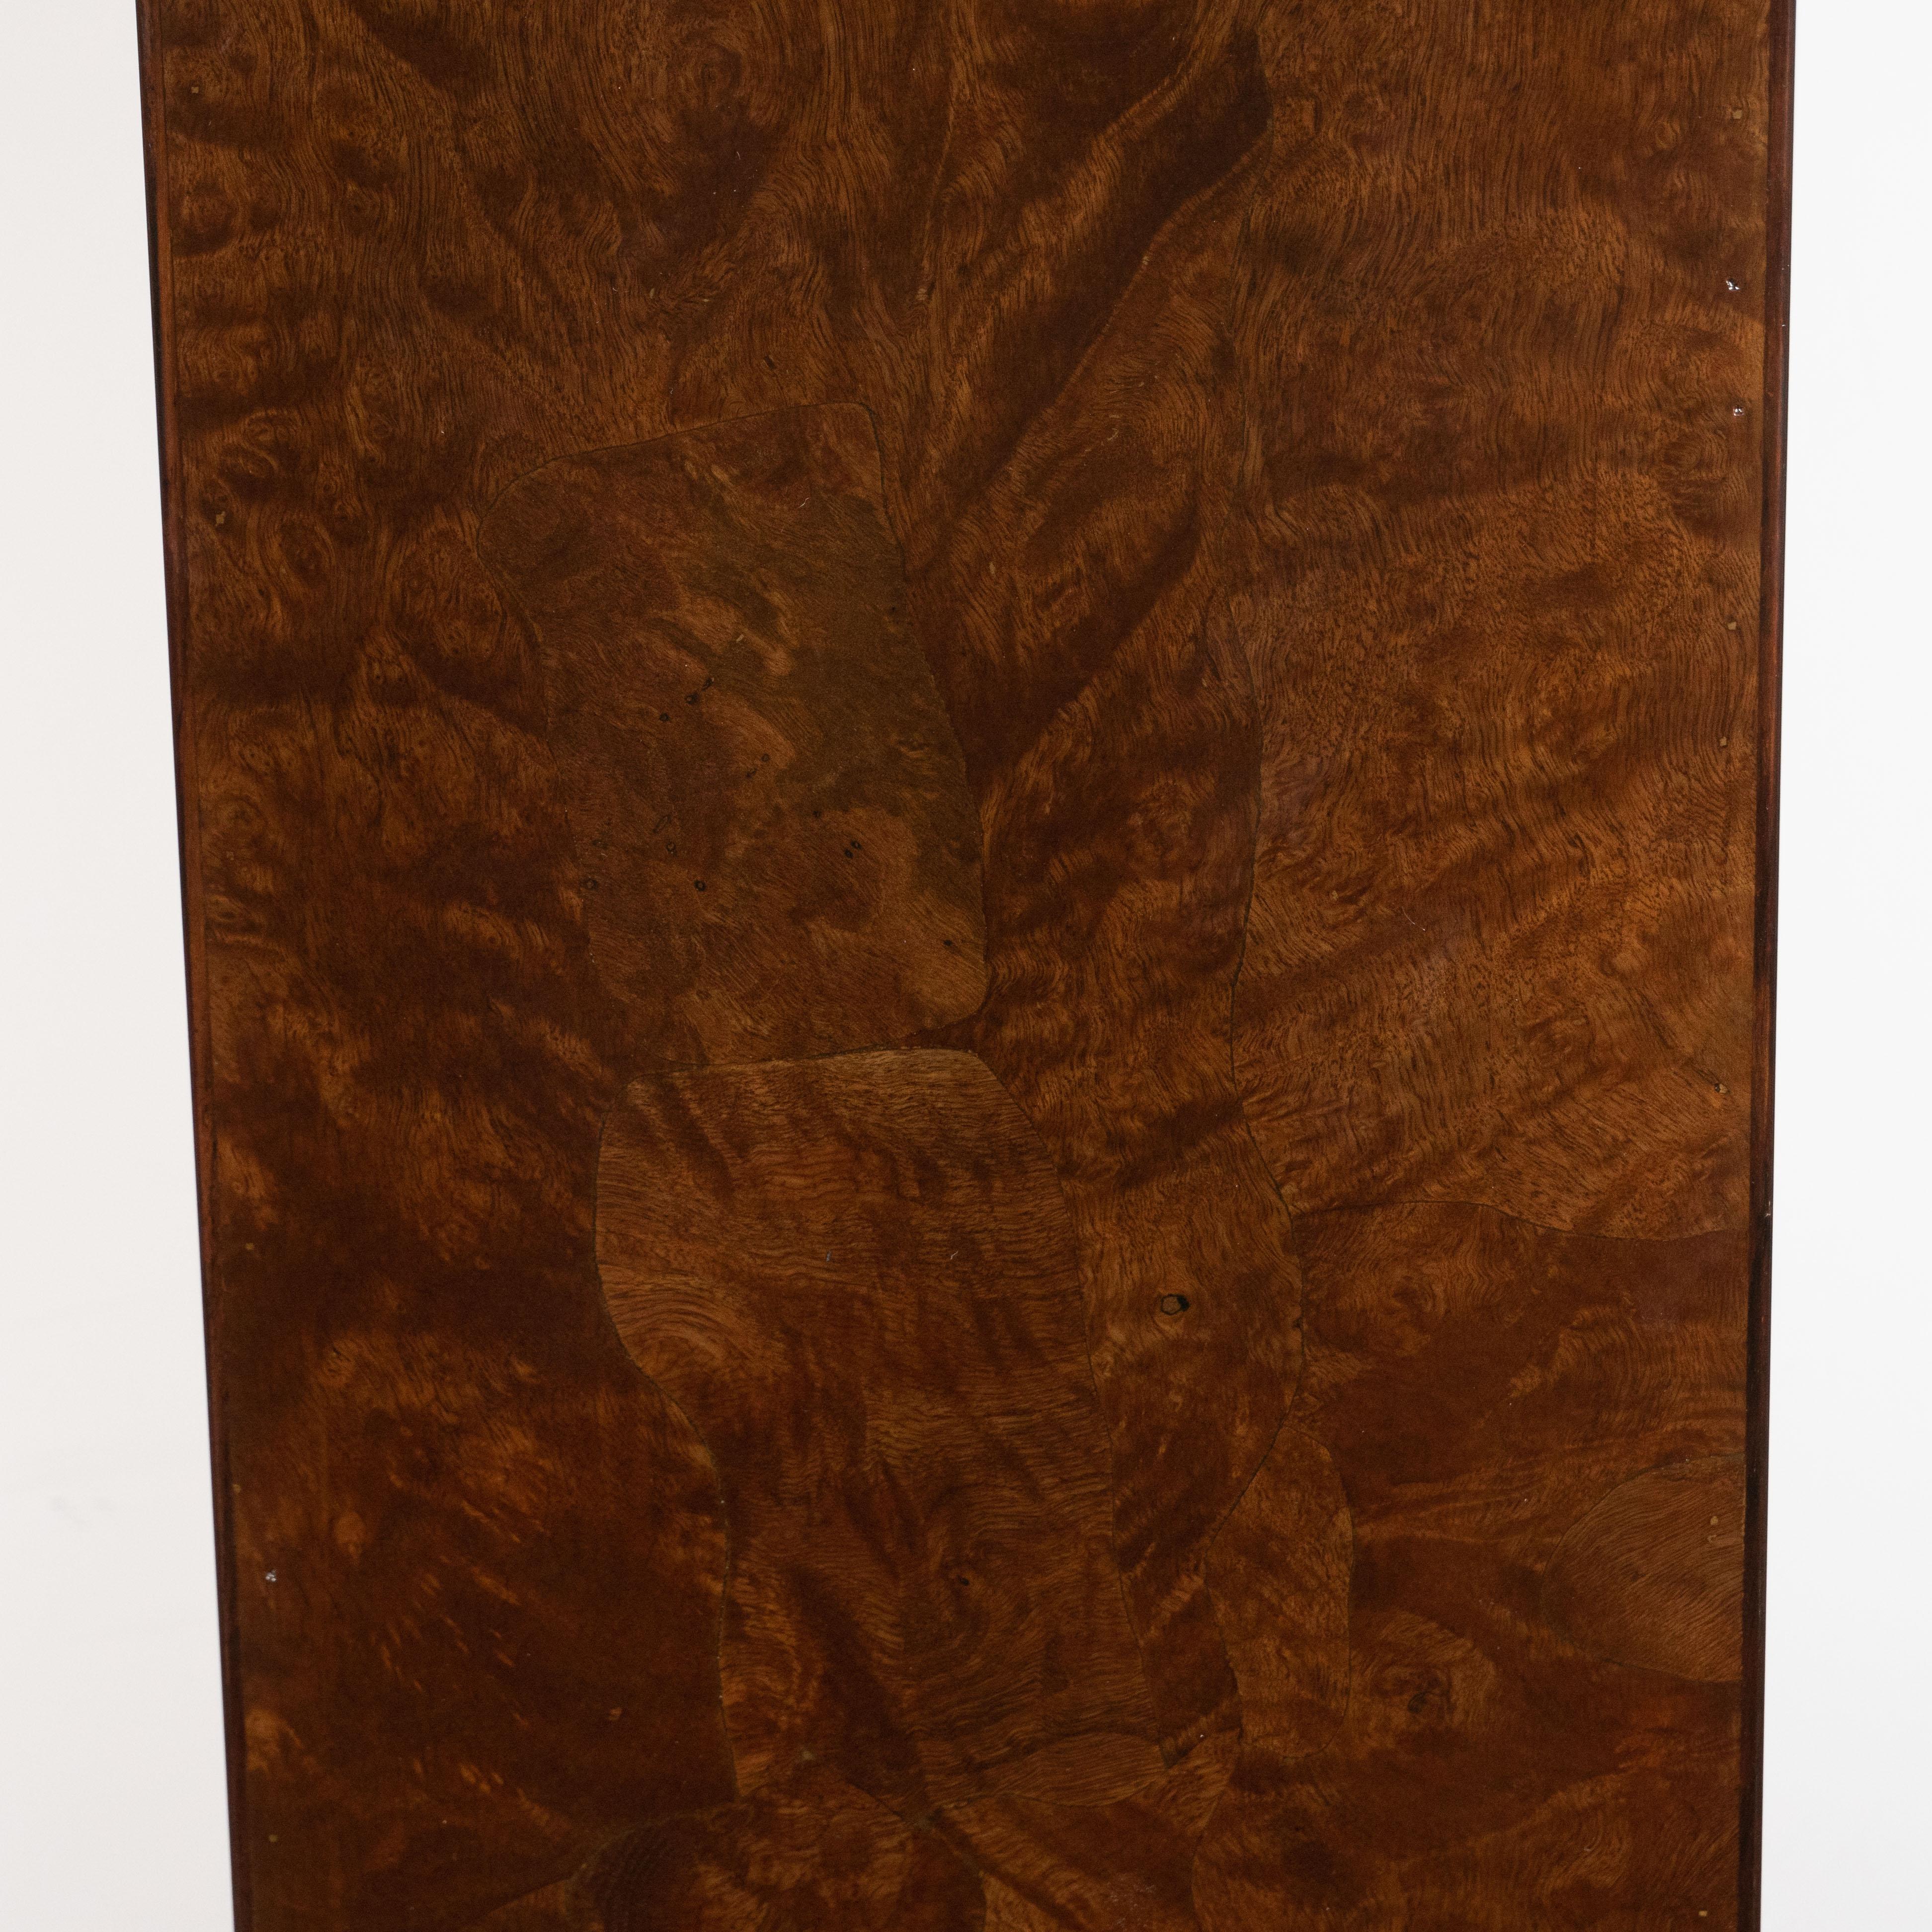 American Mid-Century Modern Handrubbed Bookmatched Burled Walnut Pedestal